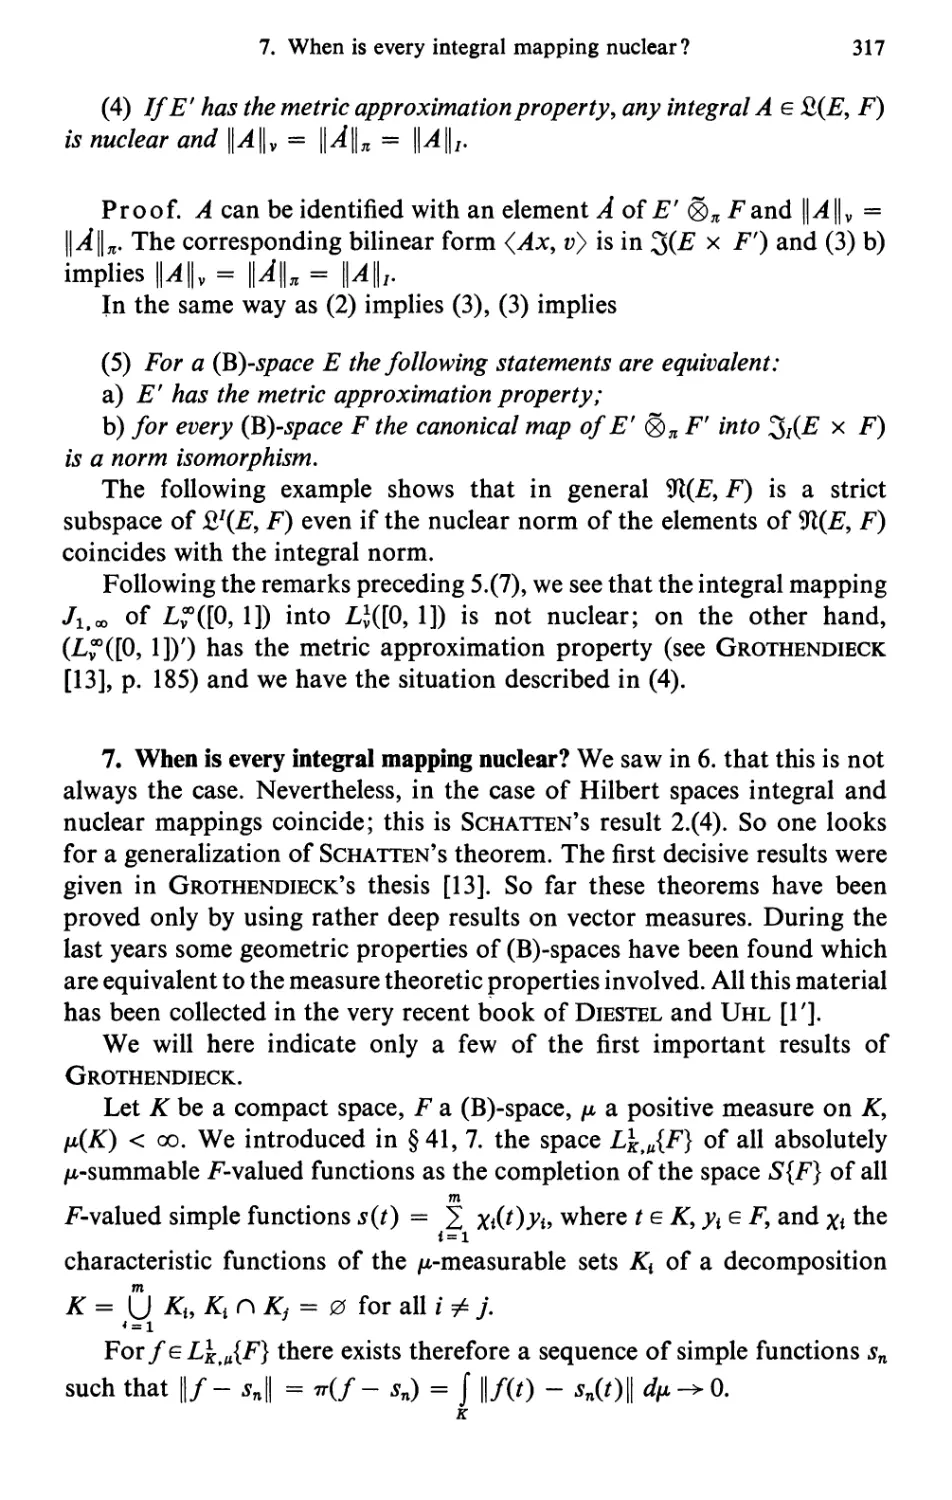 7. When is every integral mapping nuclear?